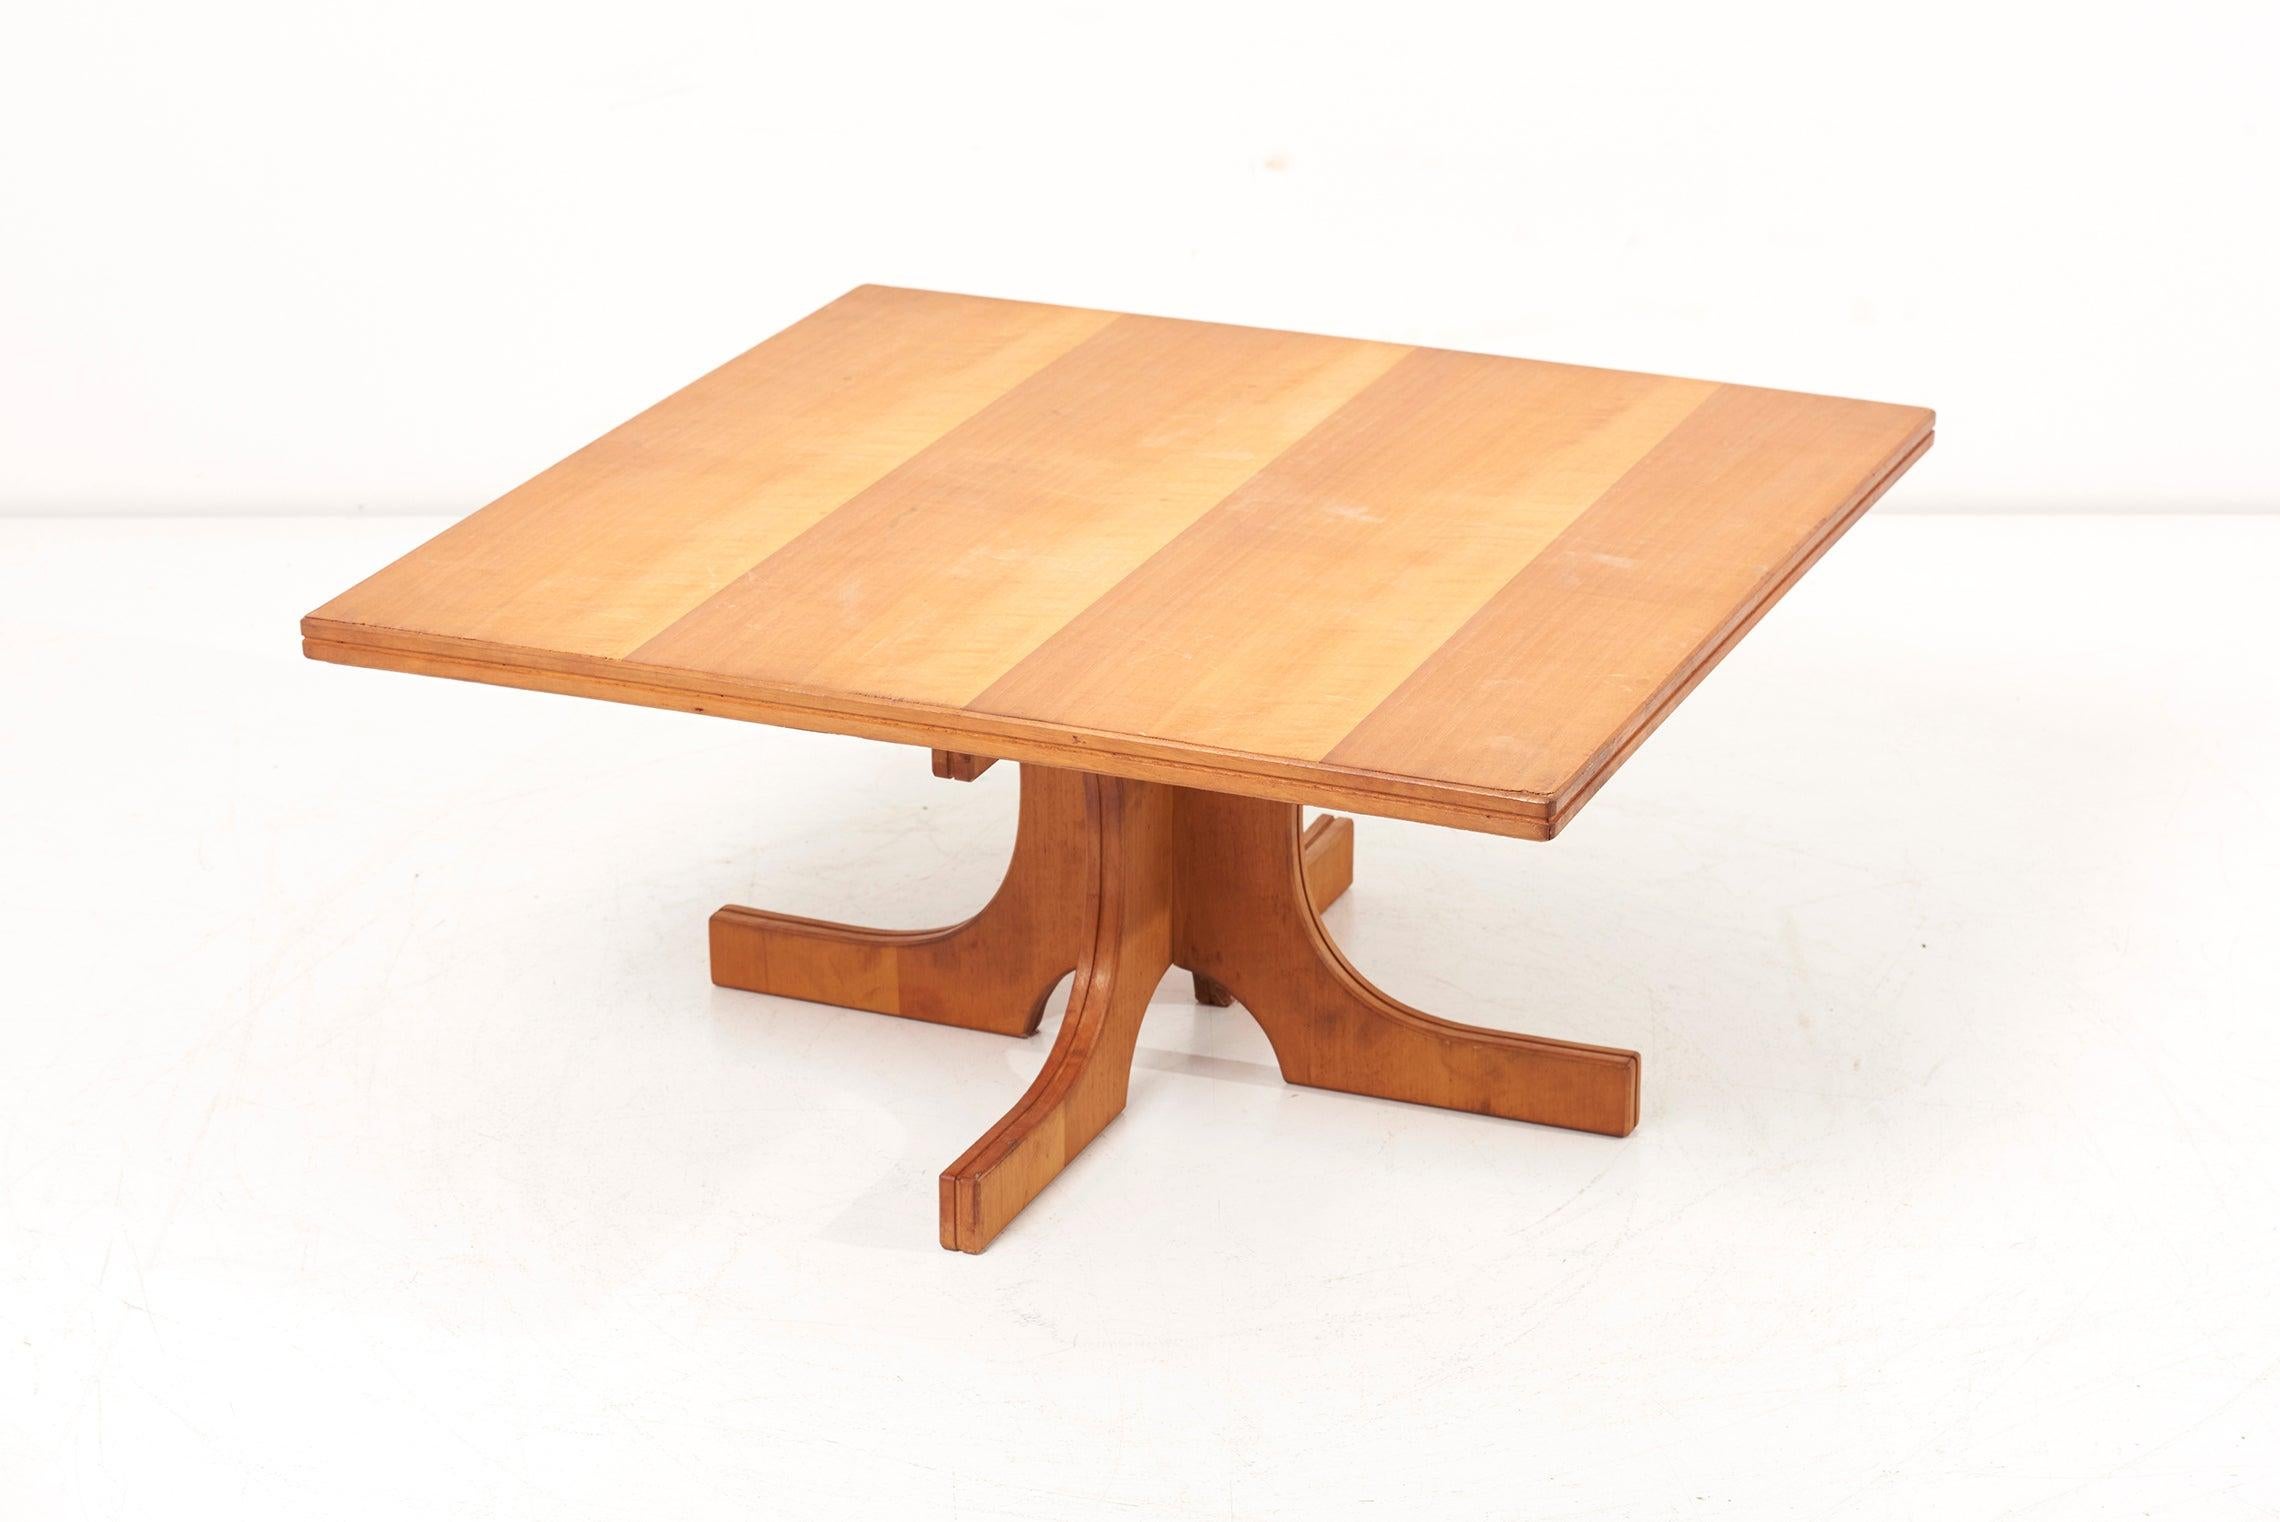 Wood 1 of 4 Architectural Italian Coffee Tables, 1960s For Sale